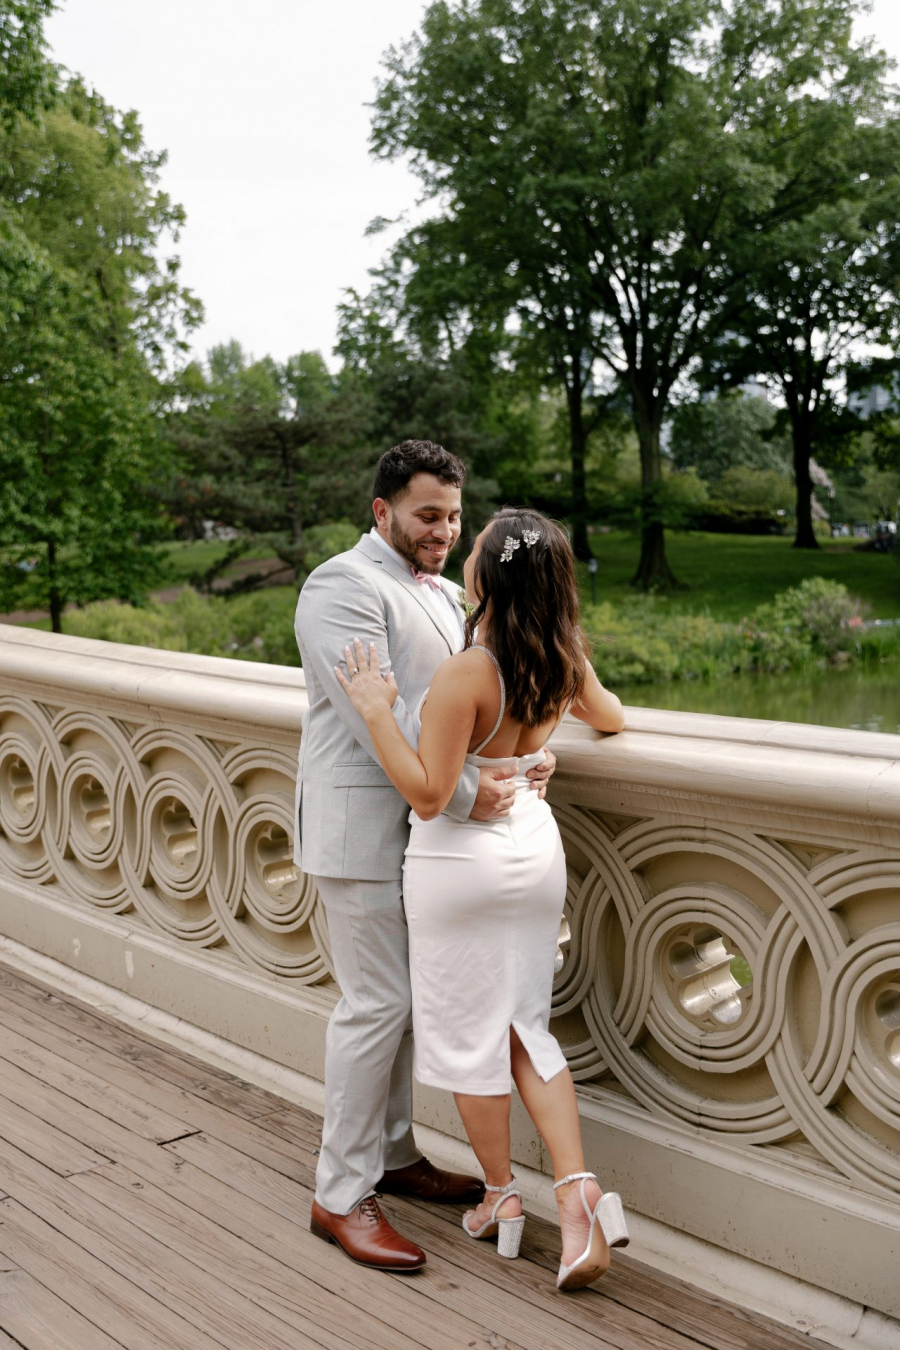 Simple wedding in Central Park NY 18